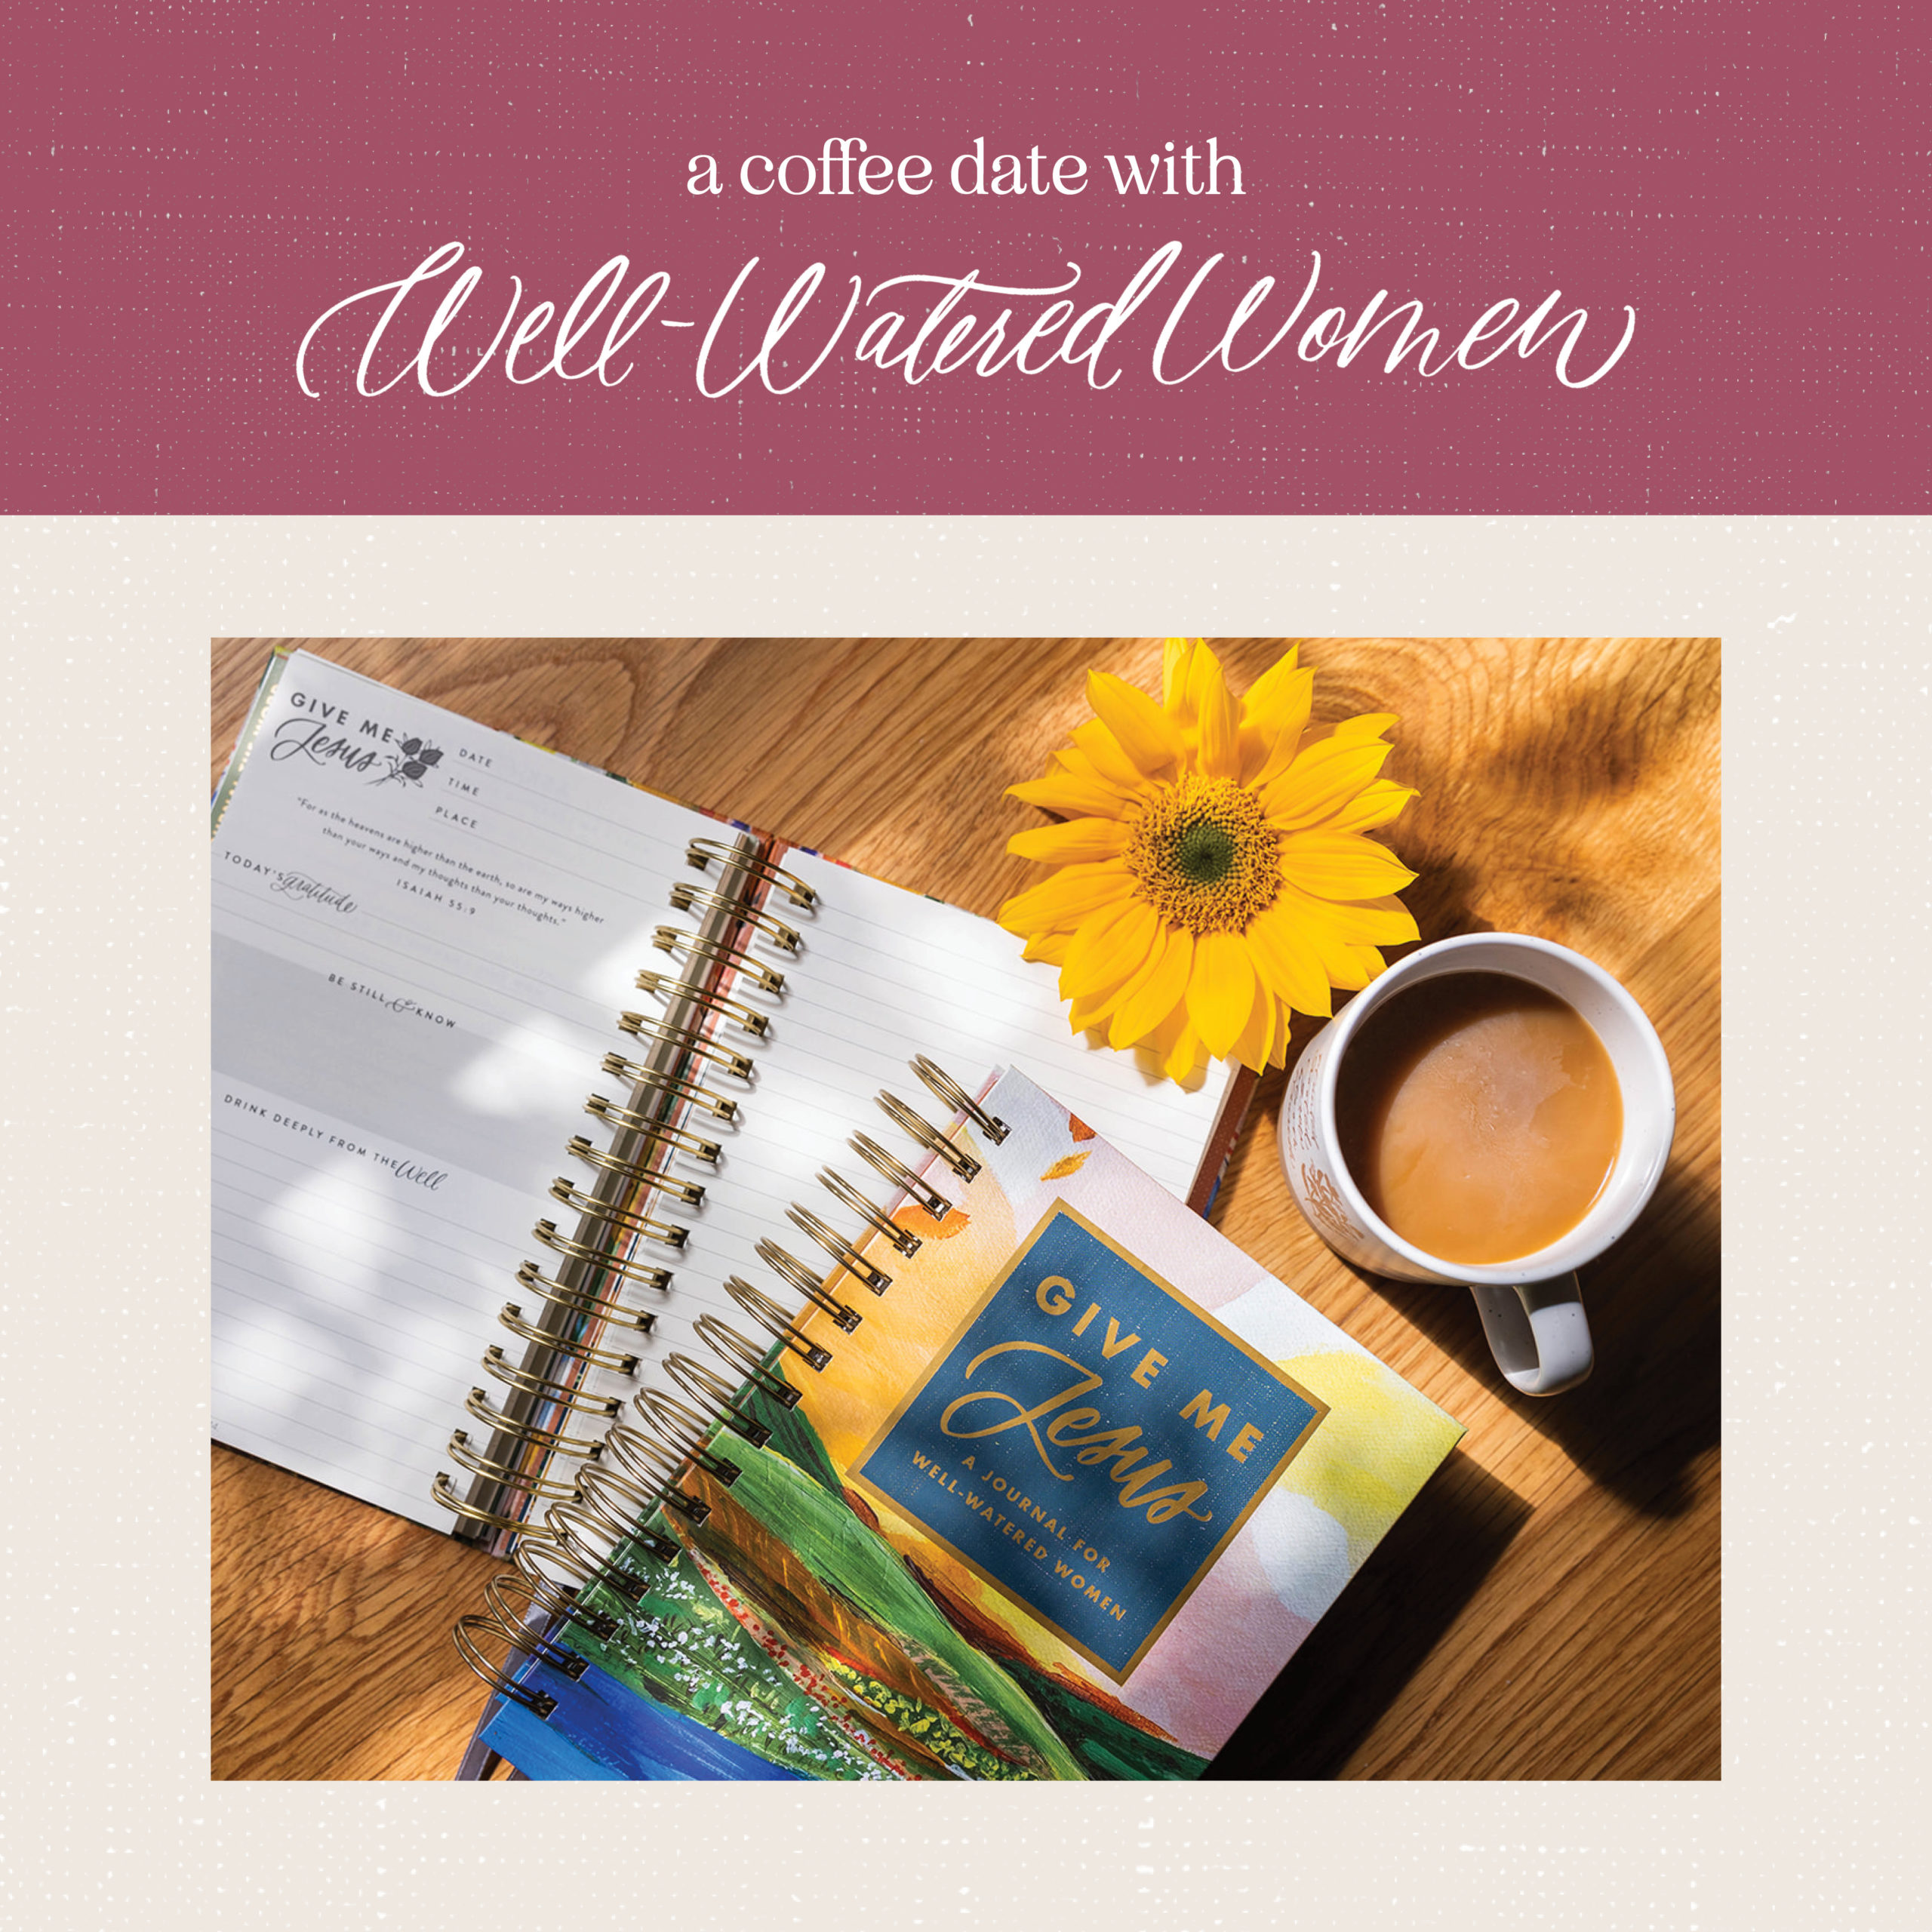 Our February Coffee Date - an article from Well-Watered Women